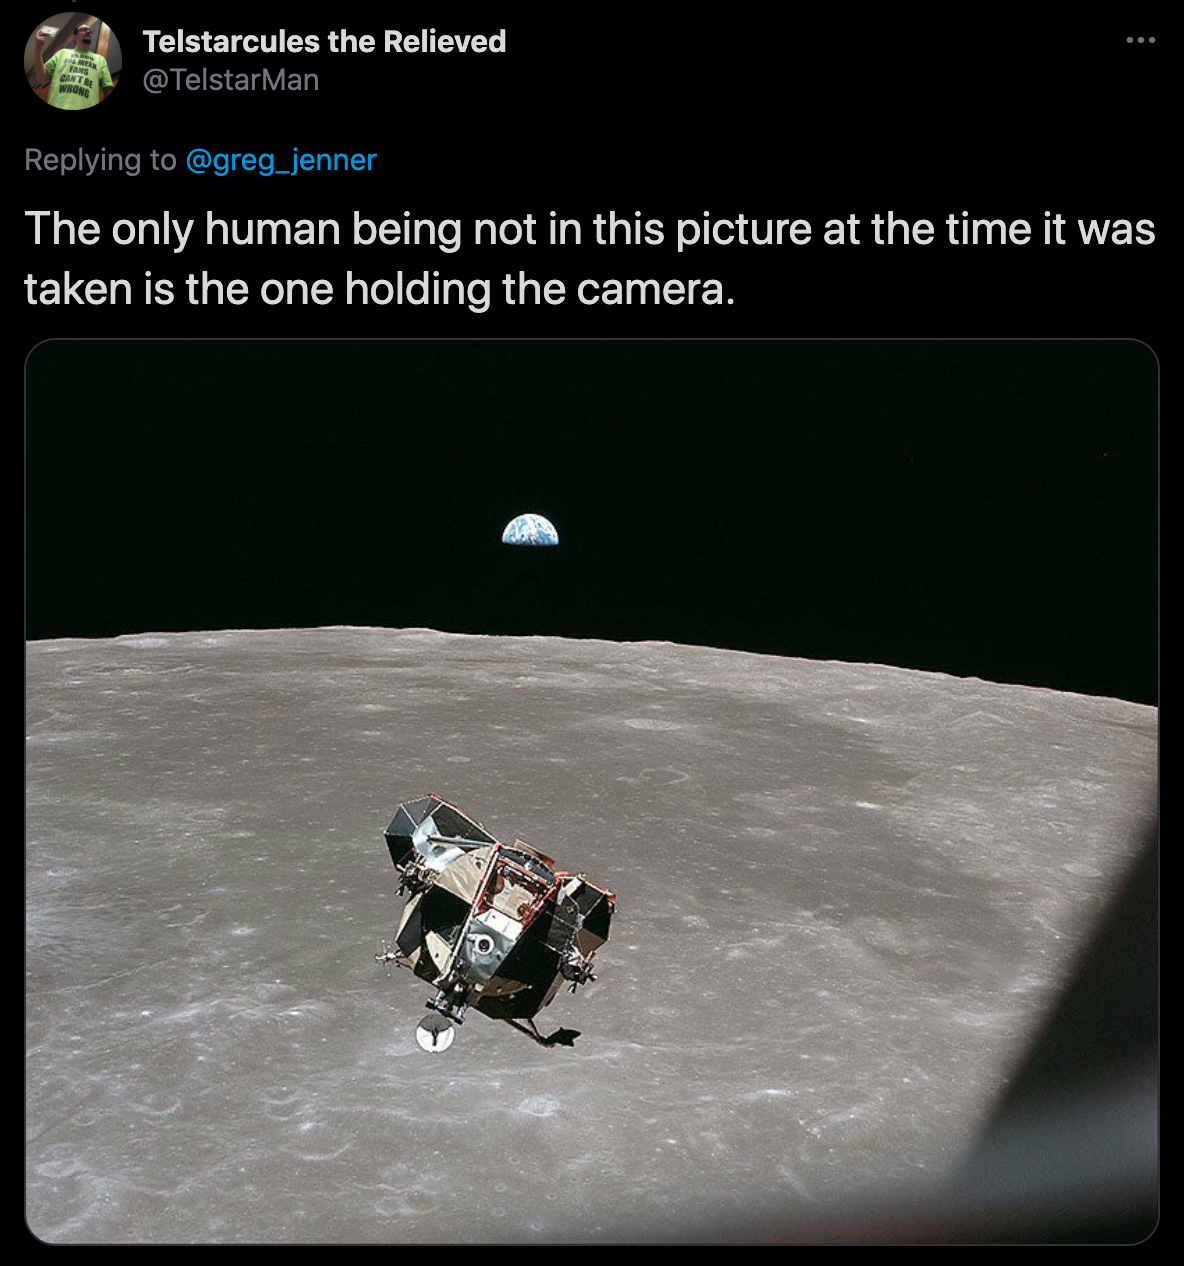 cool facts - The only human being not in this picture at the time it was taken is the one holding the camera.